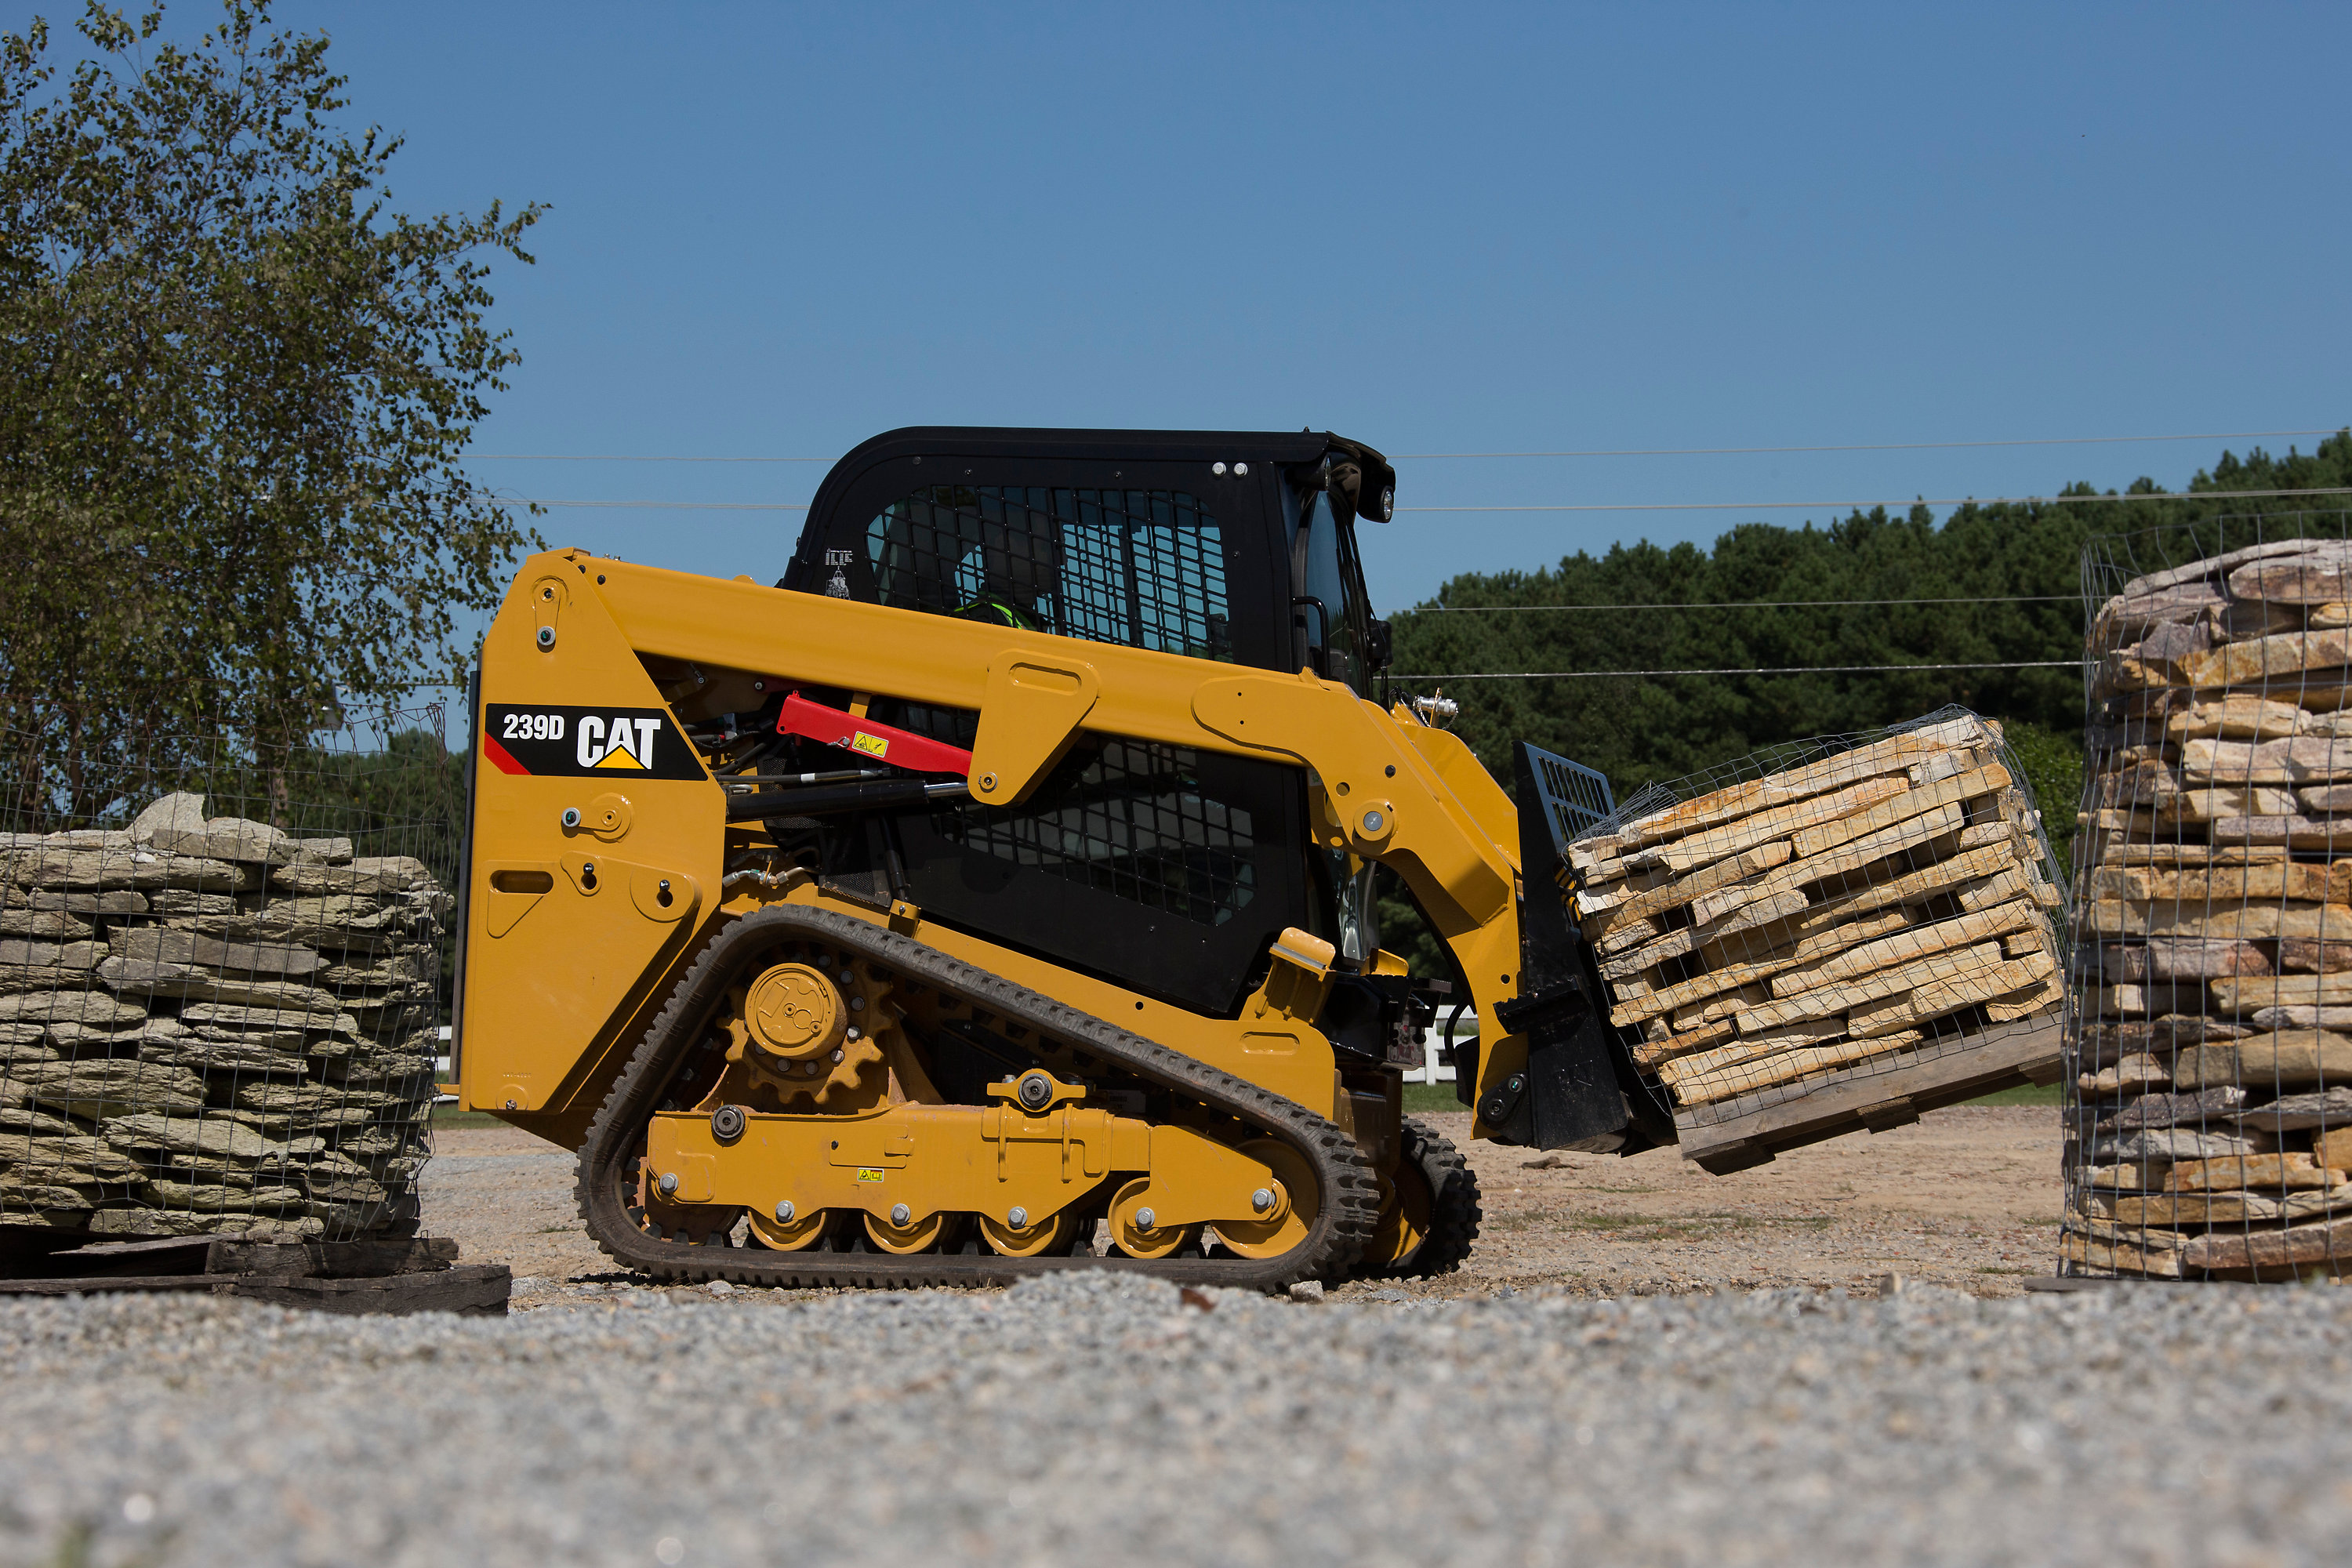 Cat 239D Compact Track Loader Equipment Rentals in Plymouth